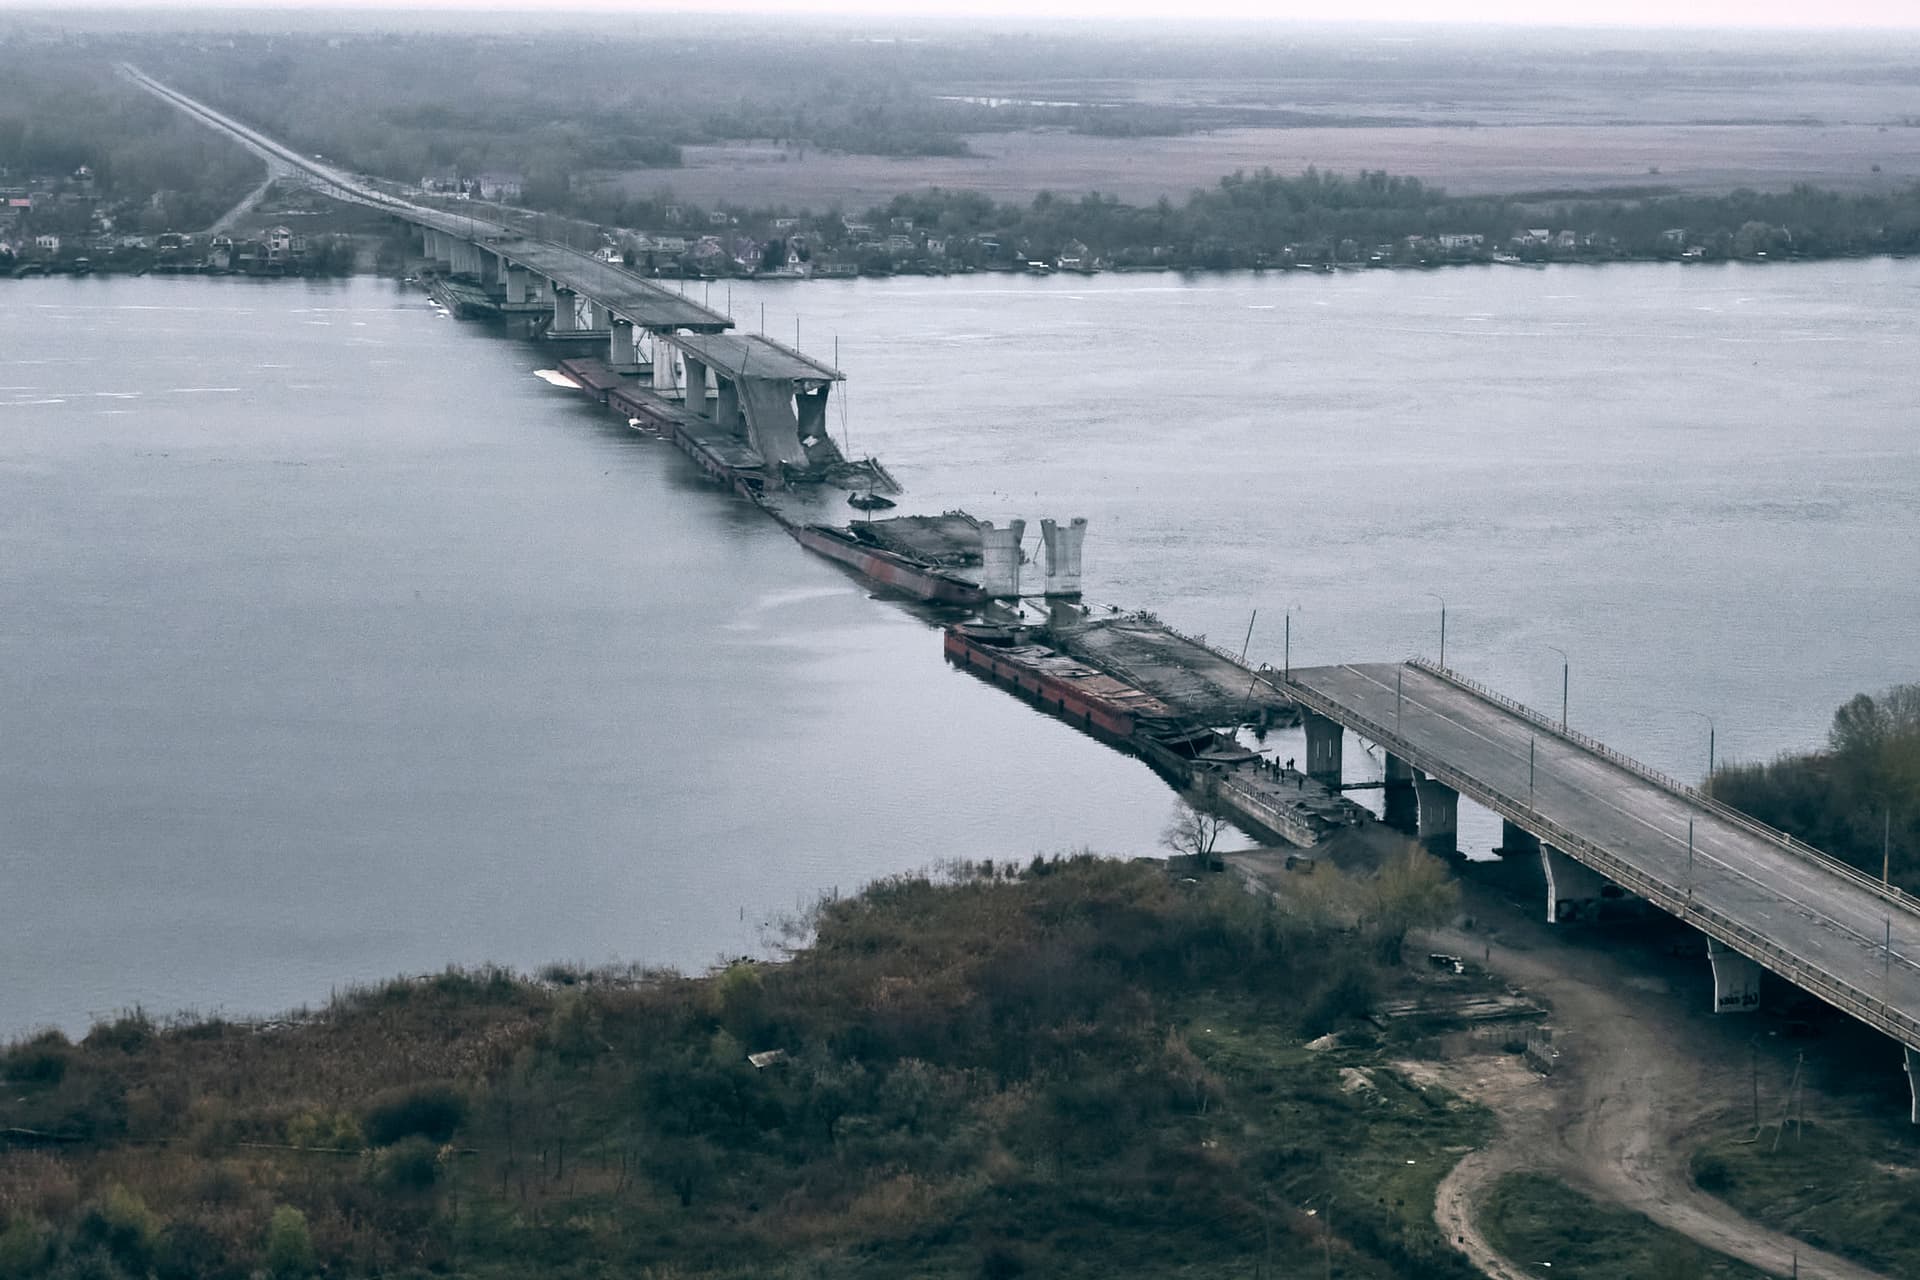 A view of the damaged Antonovsky bridge over the Dnieper river in Kherson